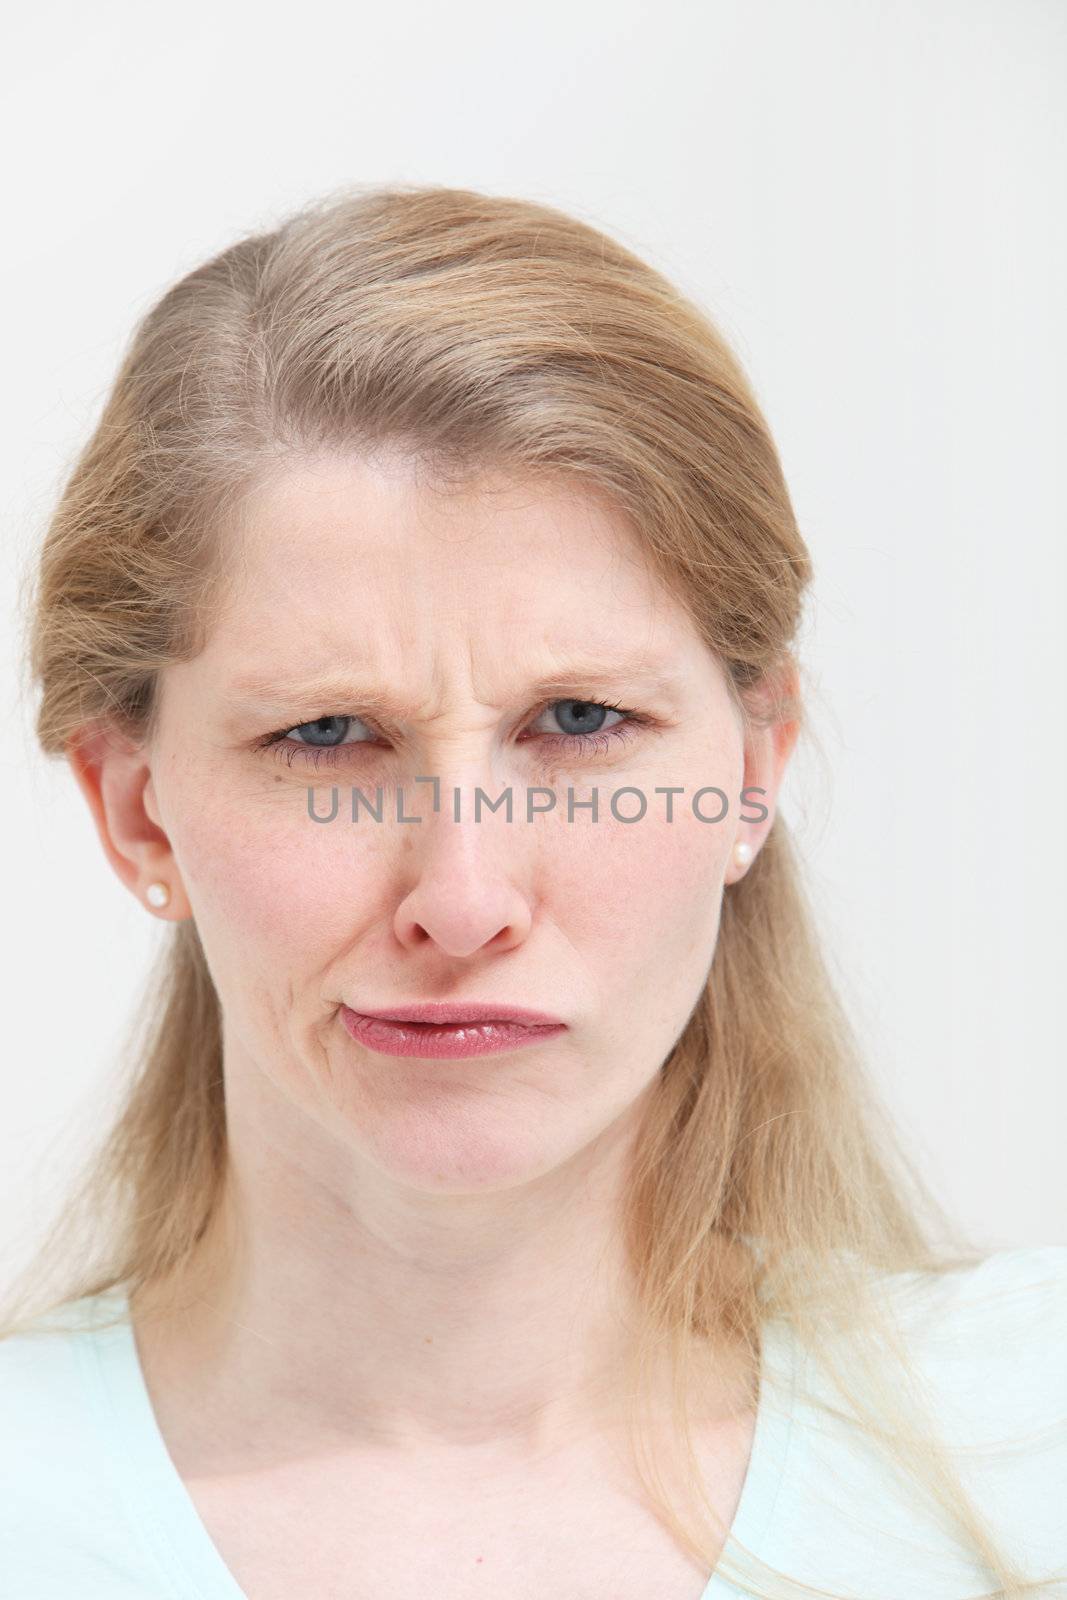 Facial portrait of an attractive young blonde woman with a frowning lopsided quizzical expression